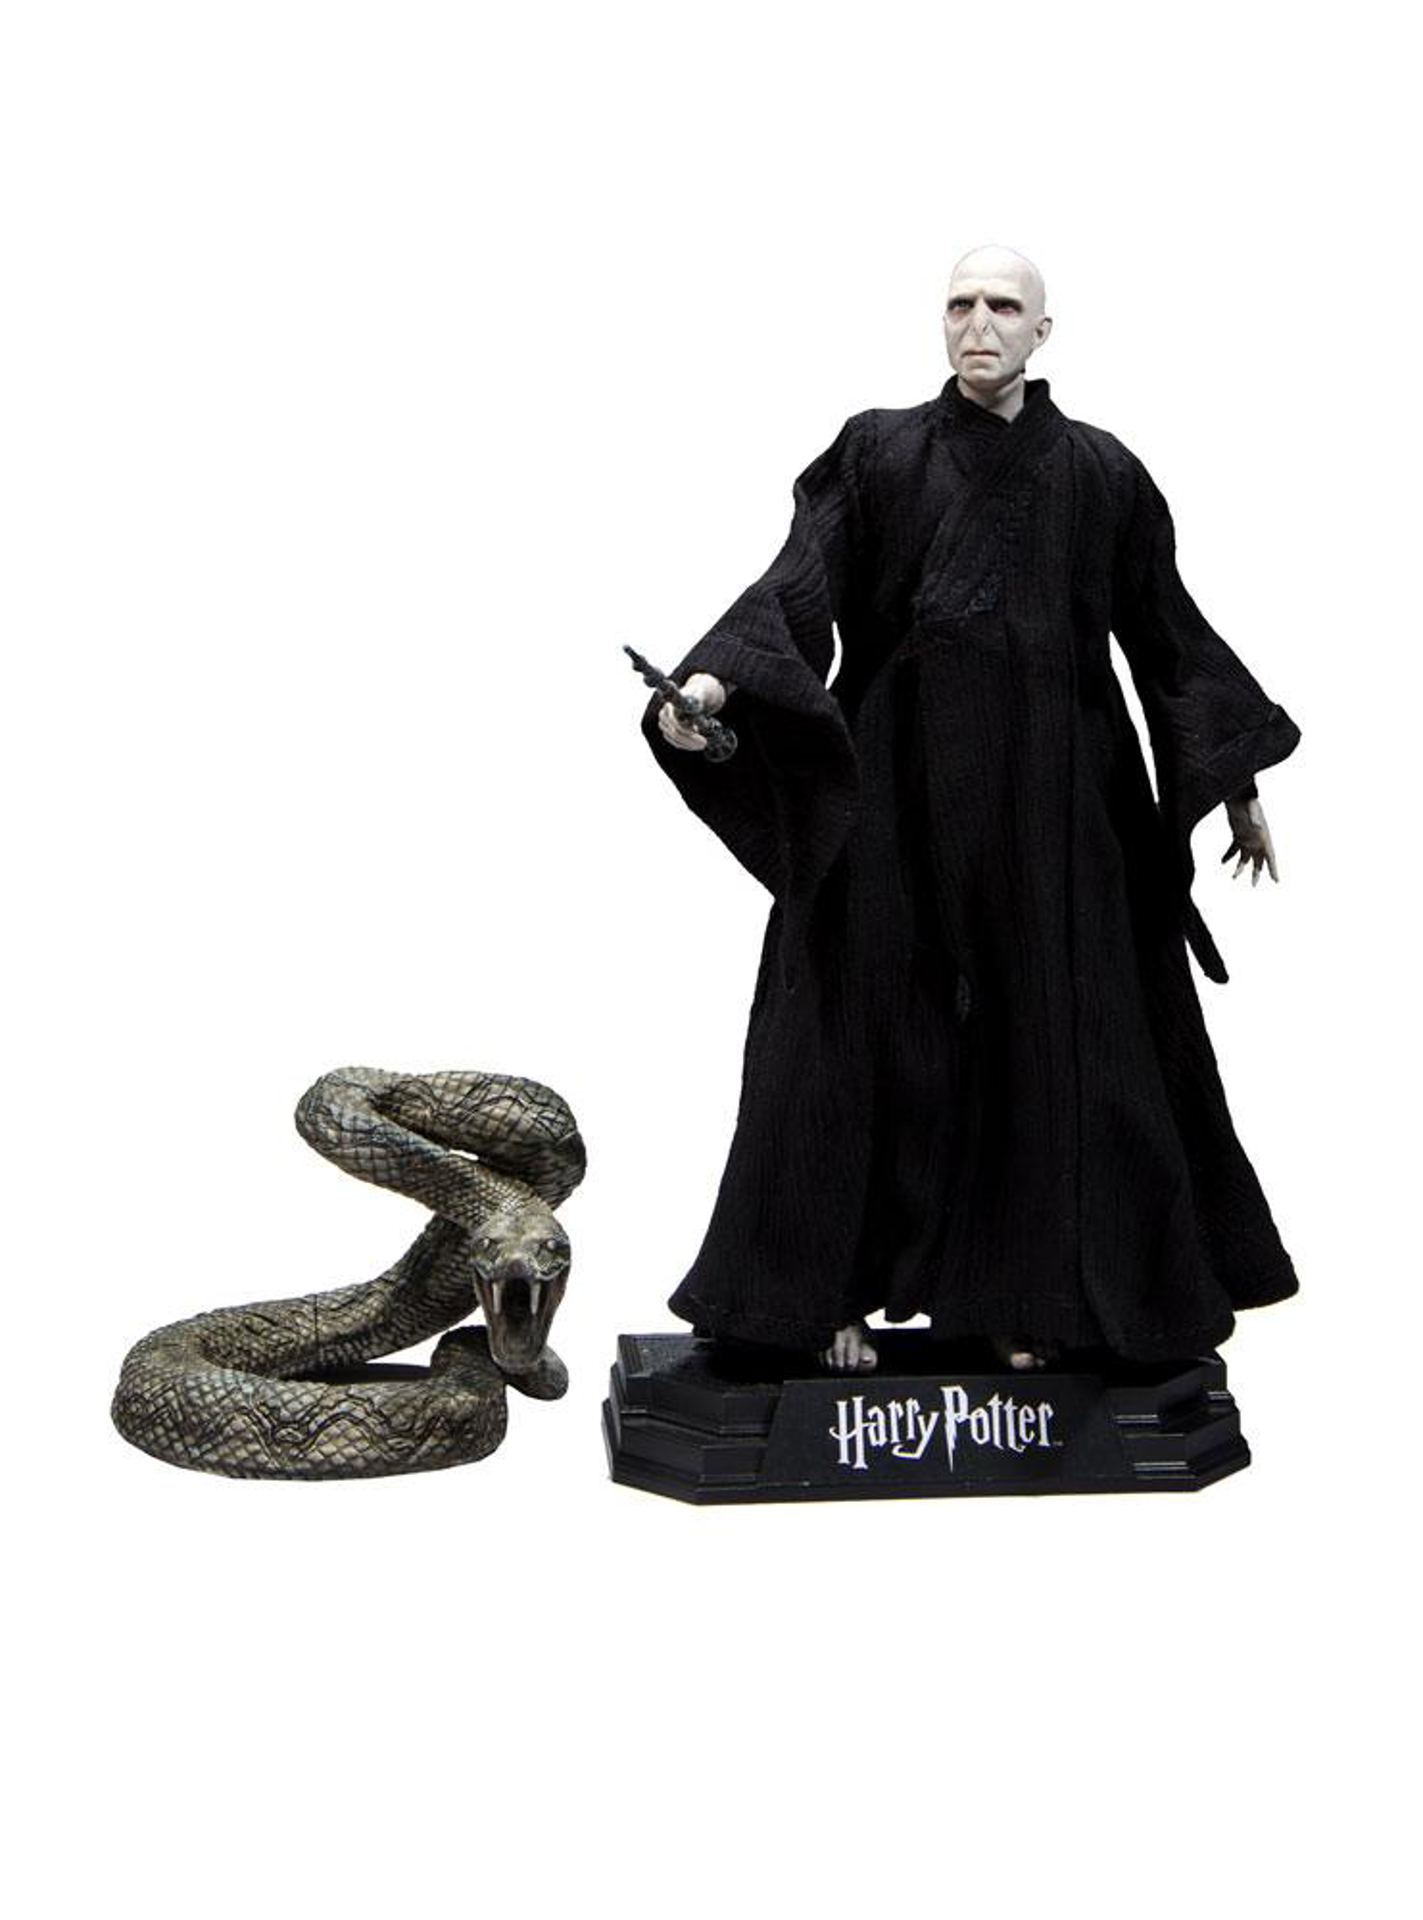 Harry Potter and the Deathly Hallows Part 2 - Lord Voldemort Action Figure 18cm